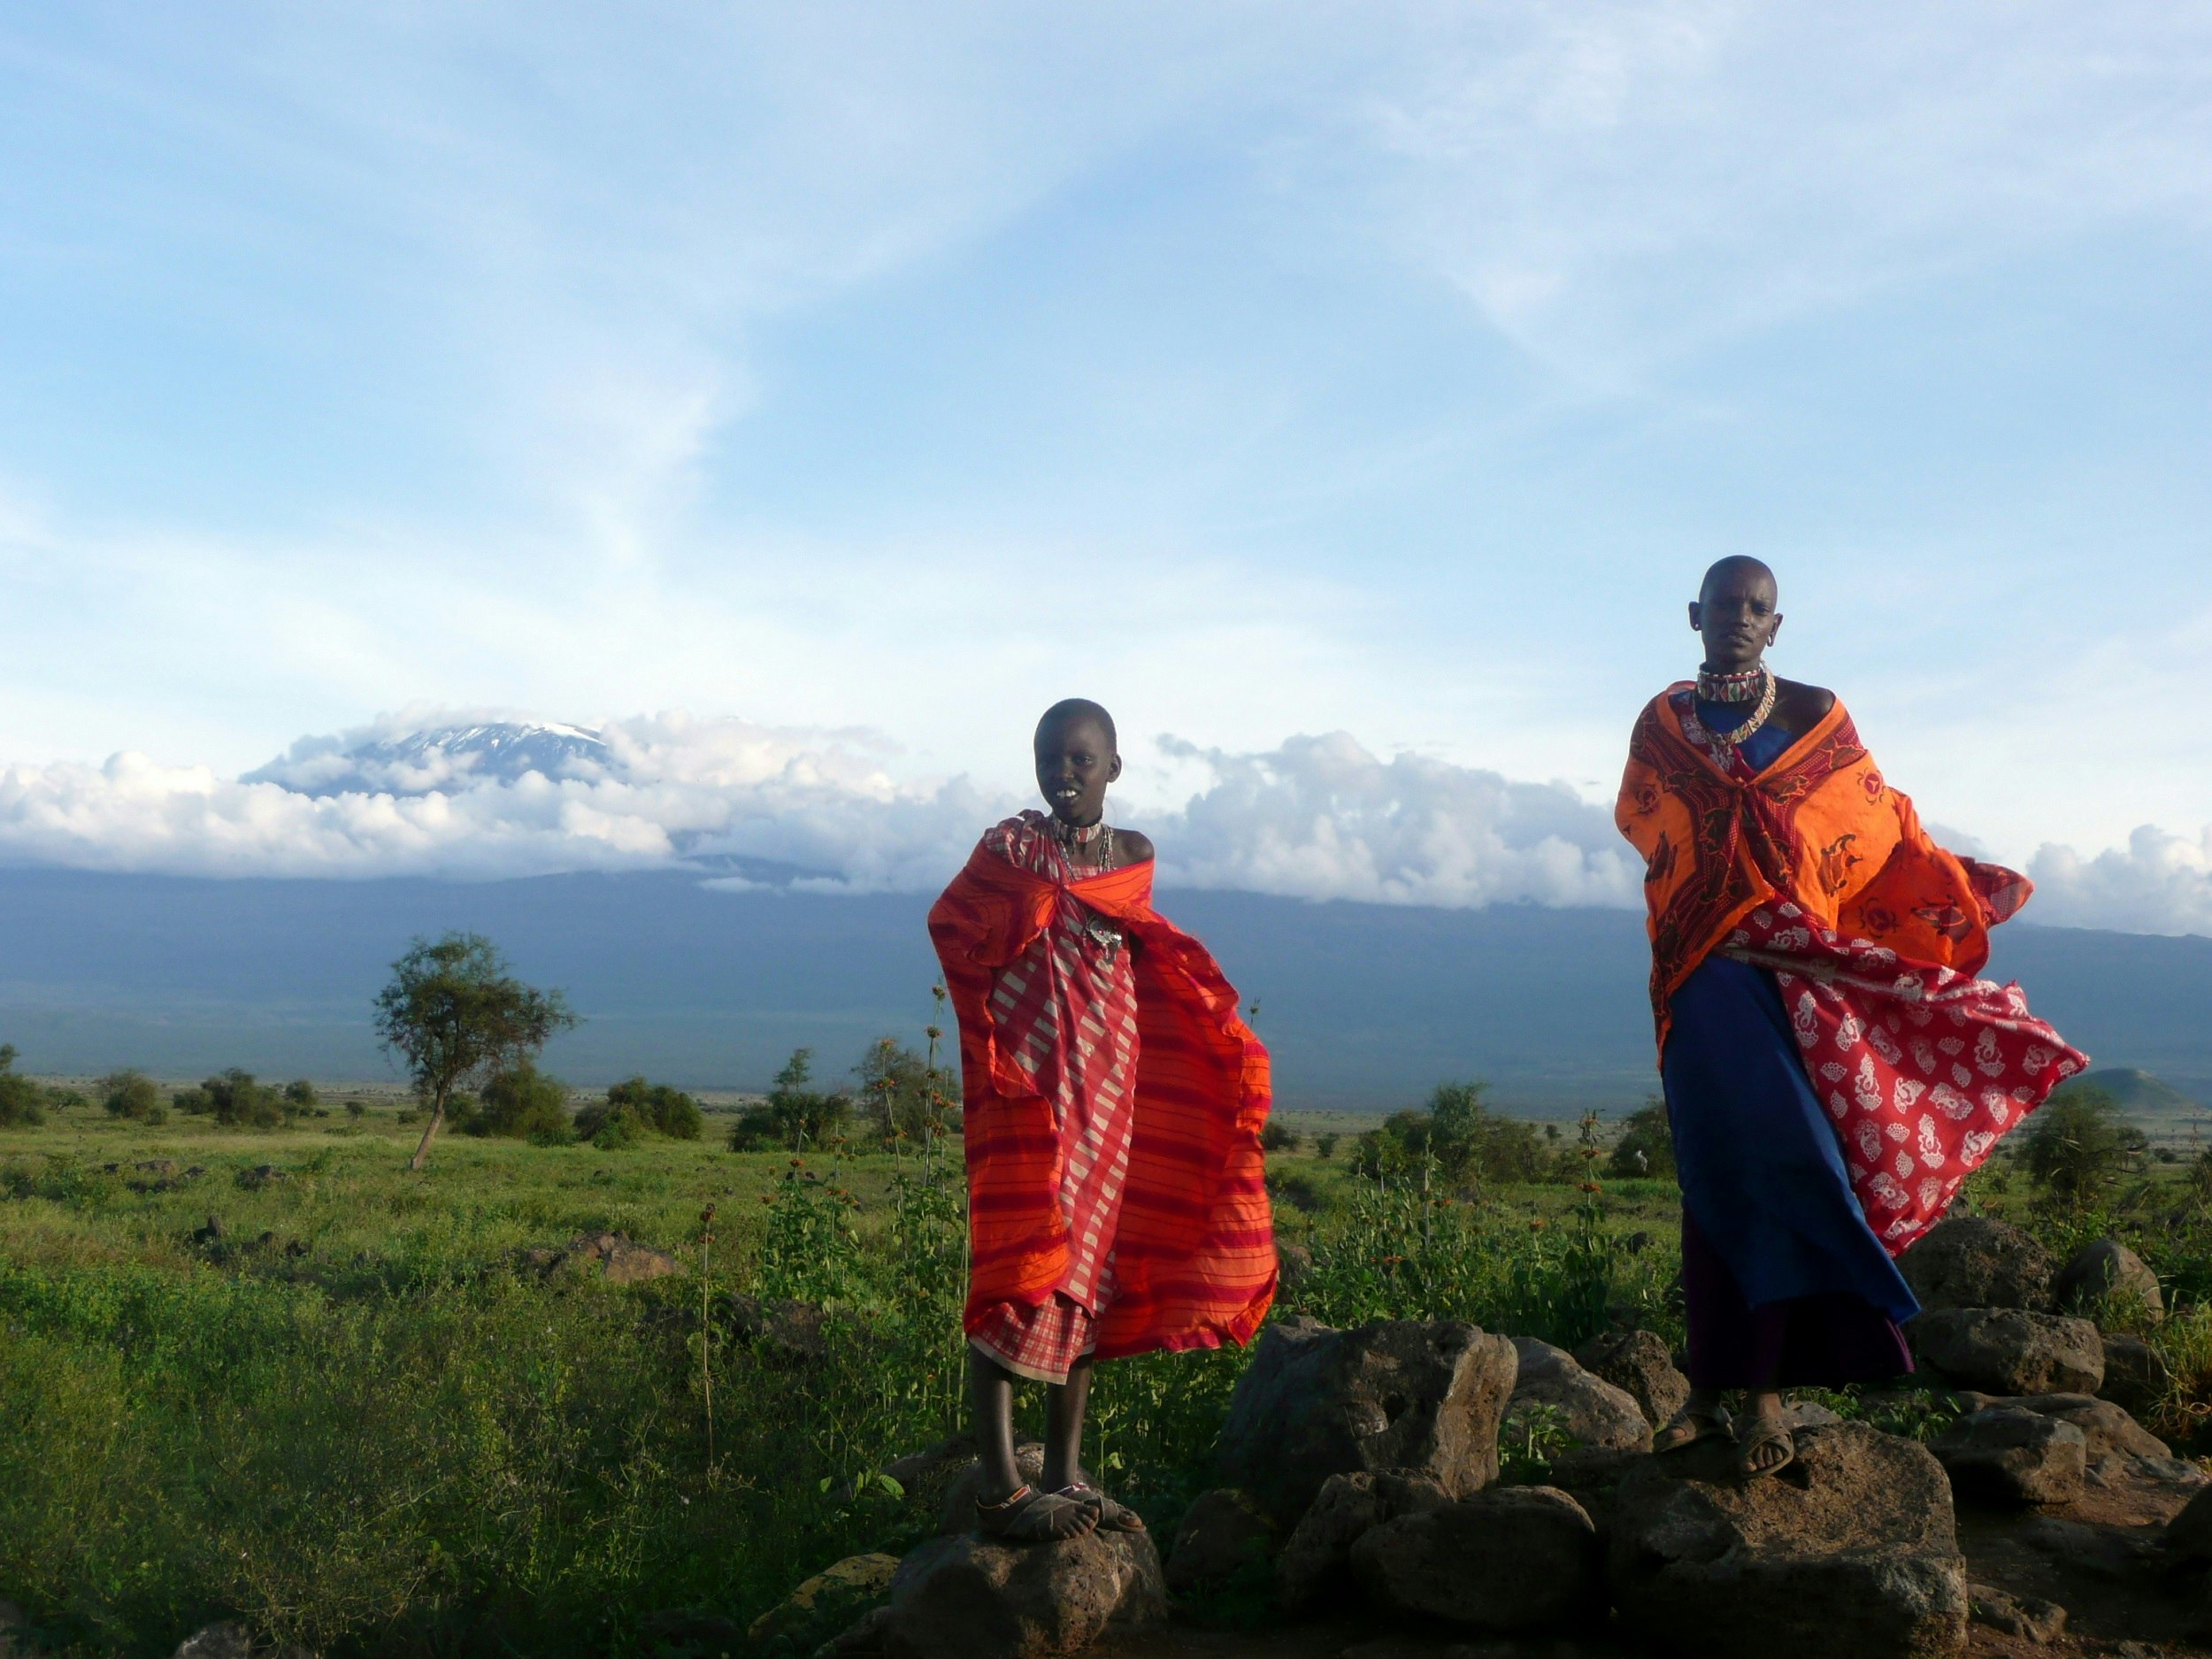 Two Maasai in traditional attire (flowing red, orange and blue robes) stand on rocks, with the grassy savannah and Mt Kilimanjaro as a backdrop.